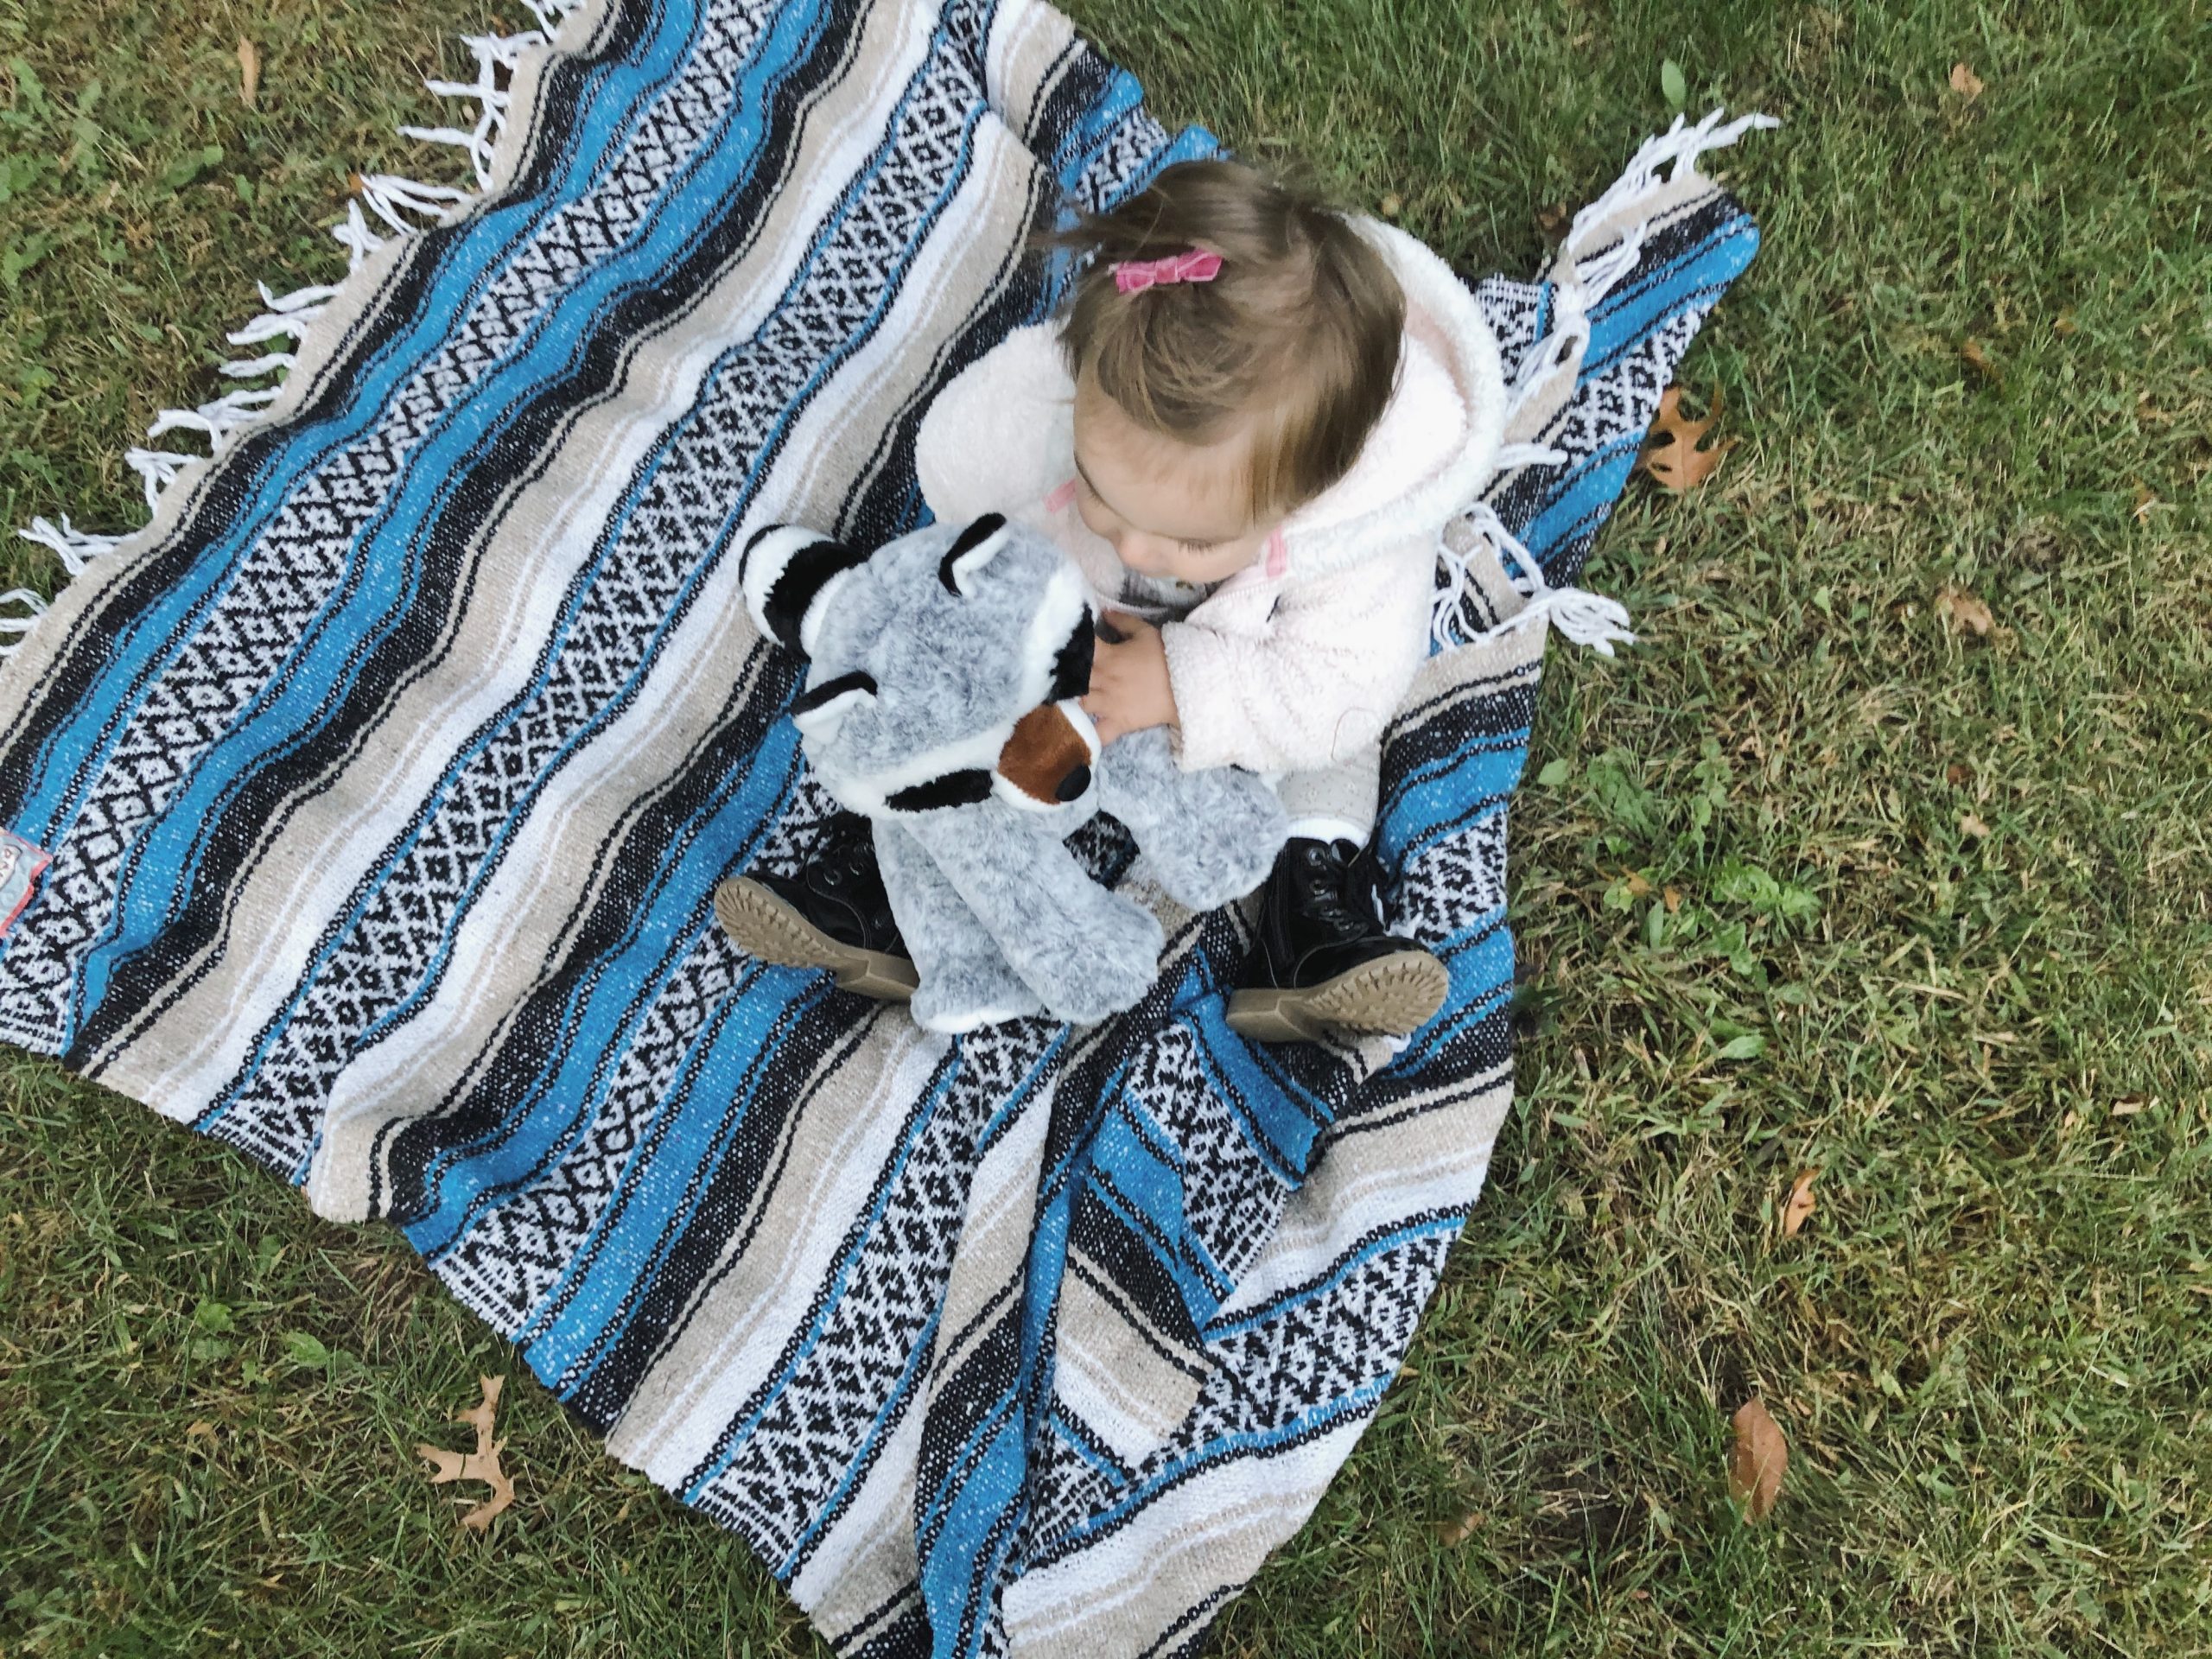 A child sitting on a blanket in the grass holding a raccoon plush stuffed buddy